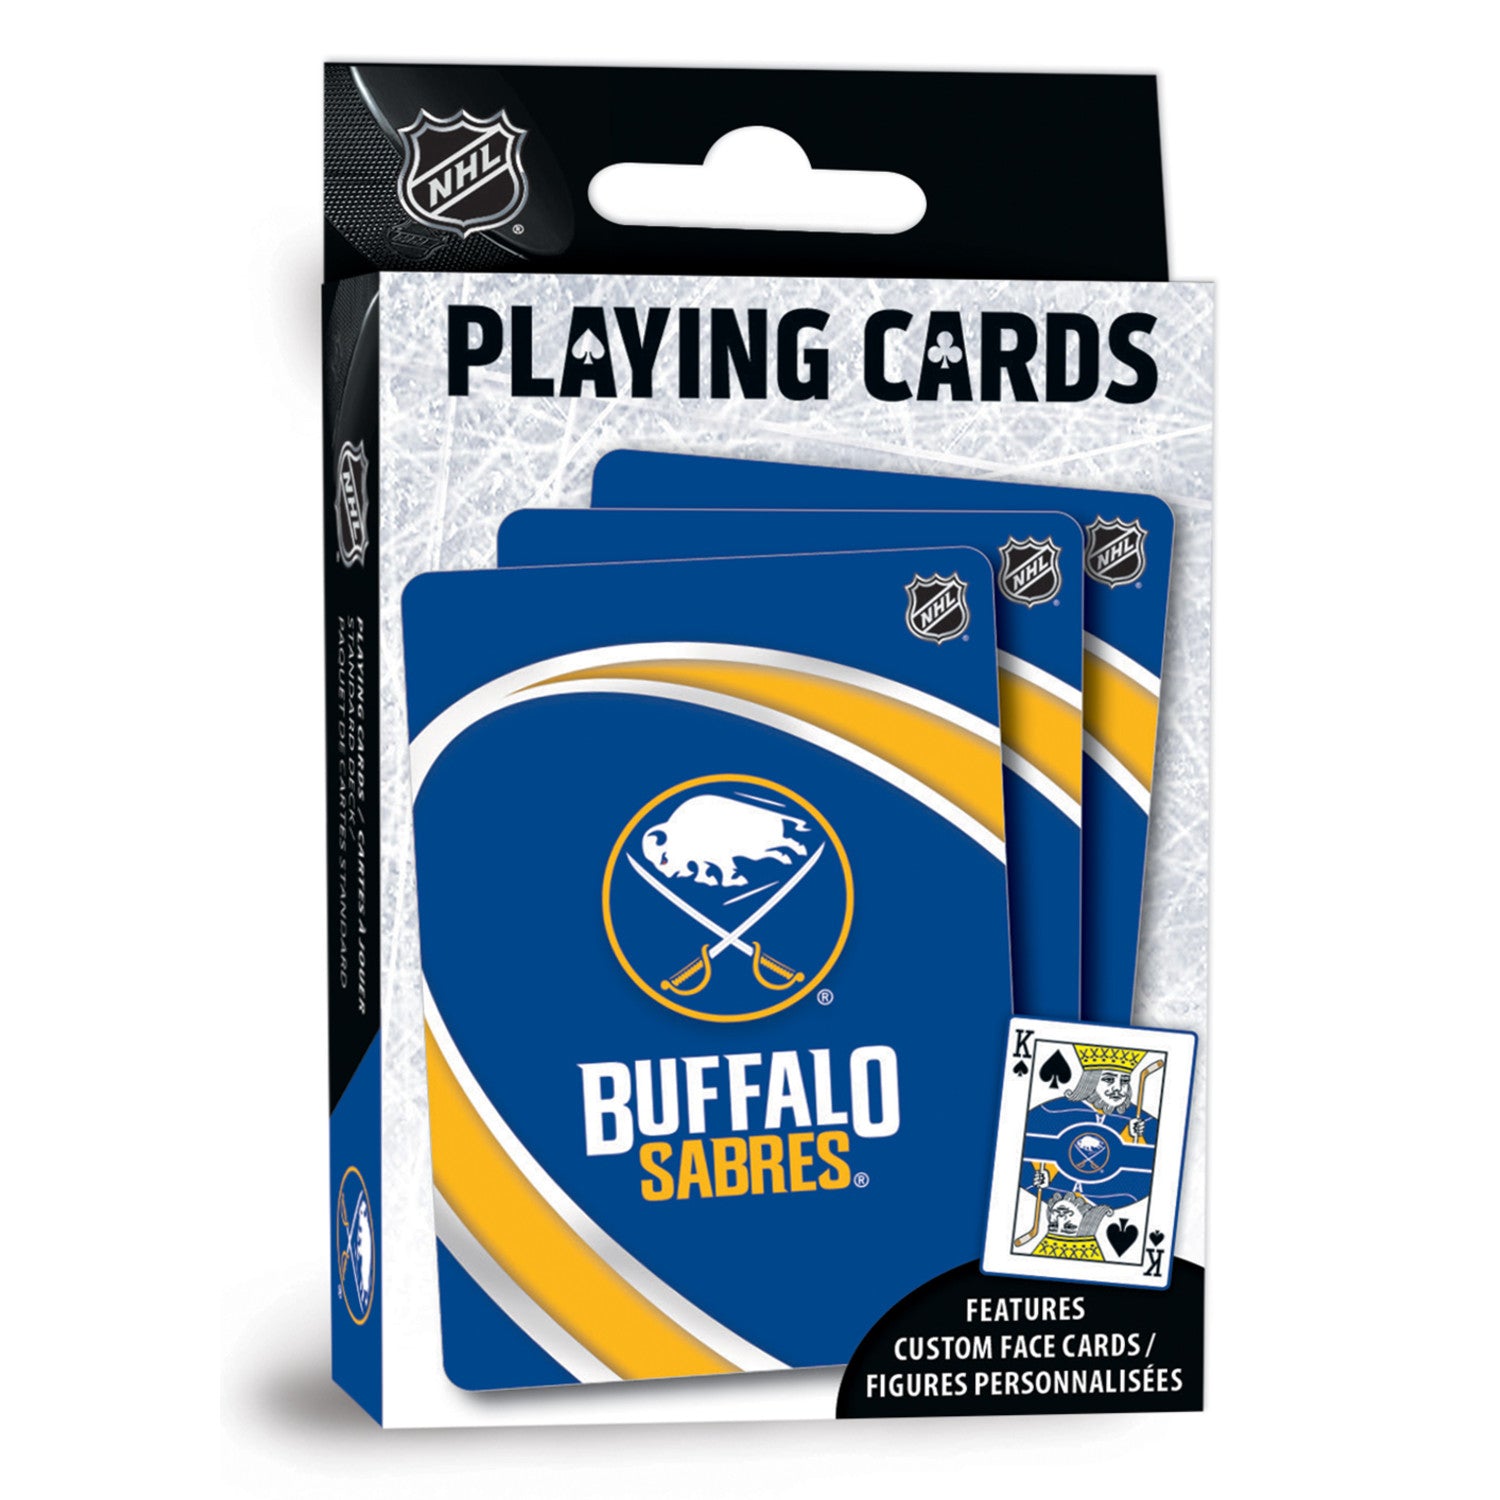 Buffalo Sabres Playing Cards - 54 Card Deck